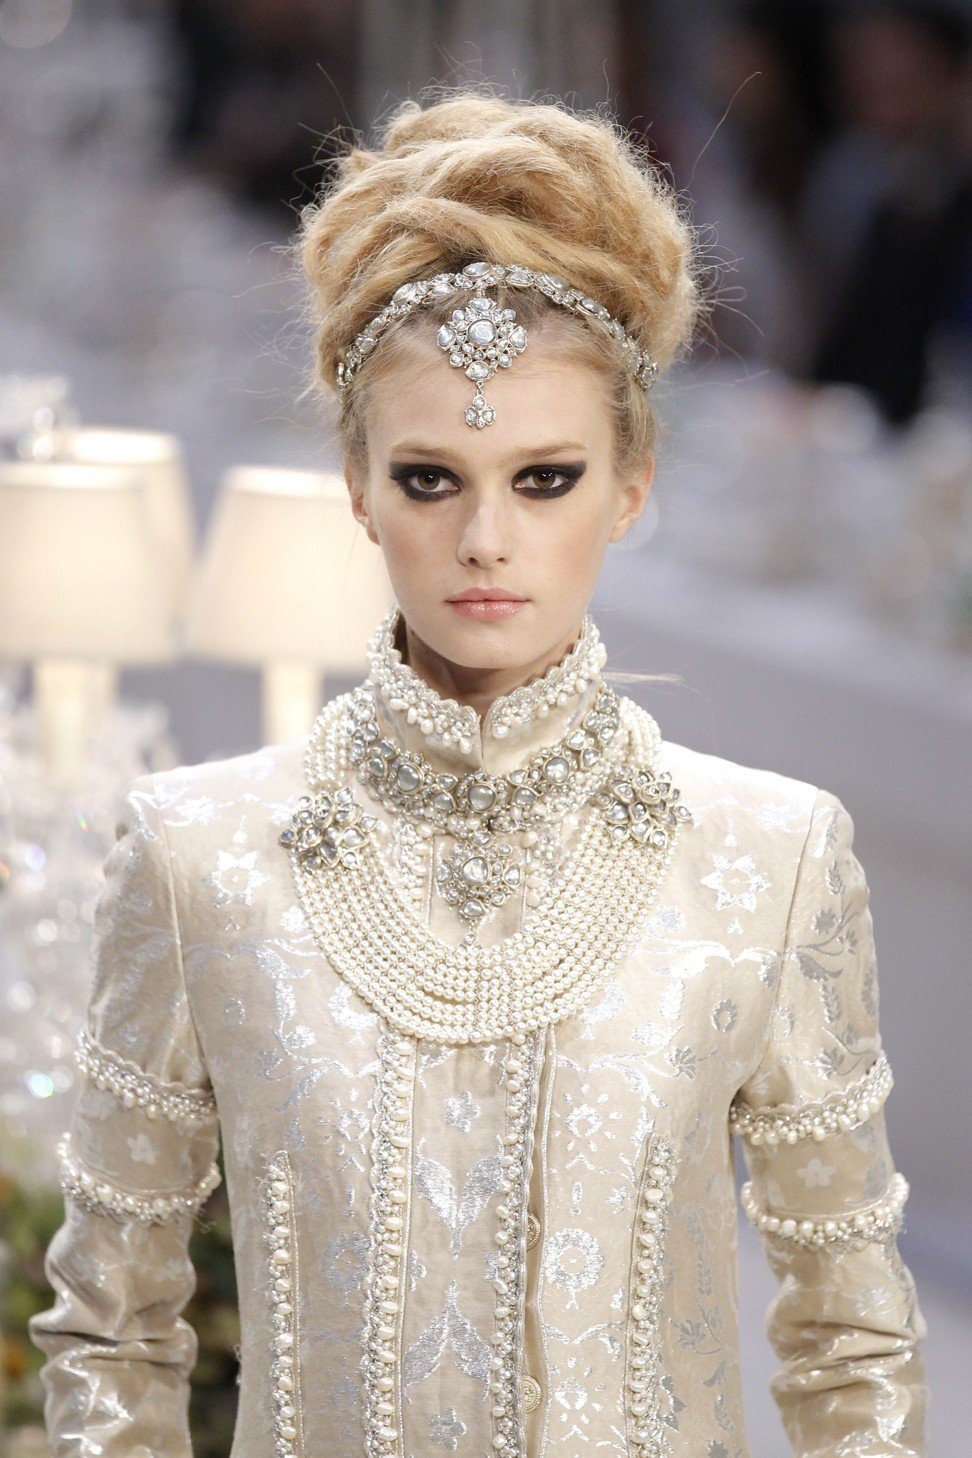 A model presents a creation with a Bombay-Paris theme by designer Karl Lagerfeld during the Metiers d'Art Show for Chanel fashion house in 2011. The show pays homage to Chanel workshops. Photo: REUTERS